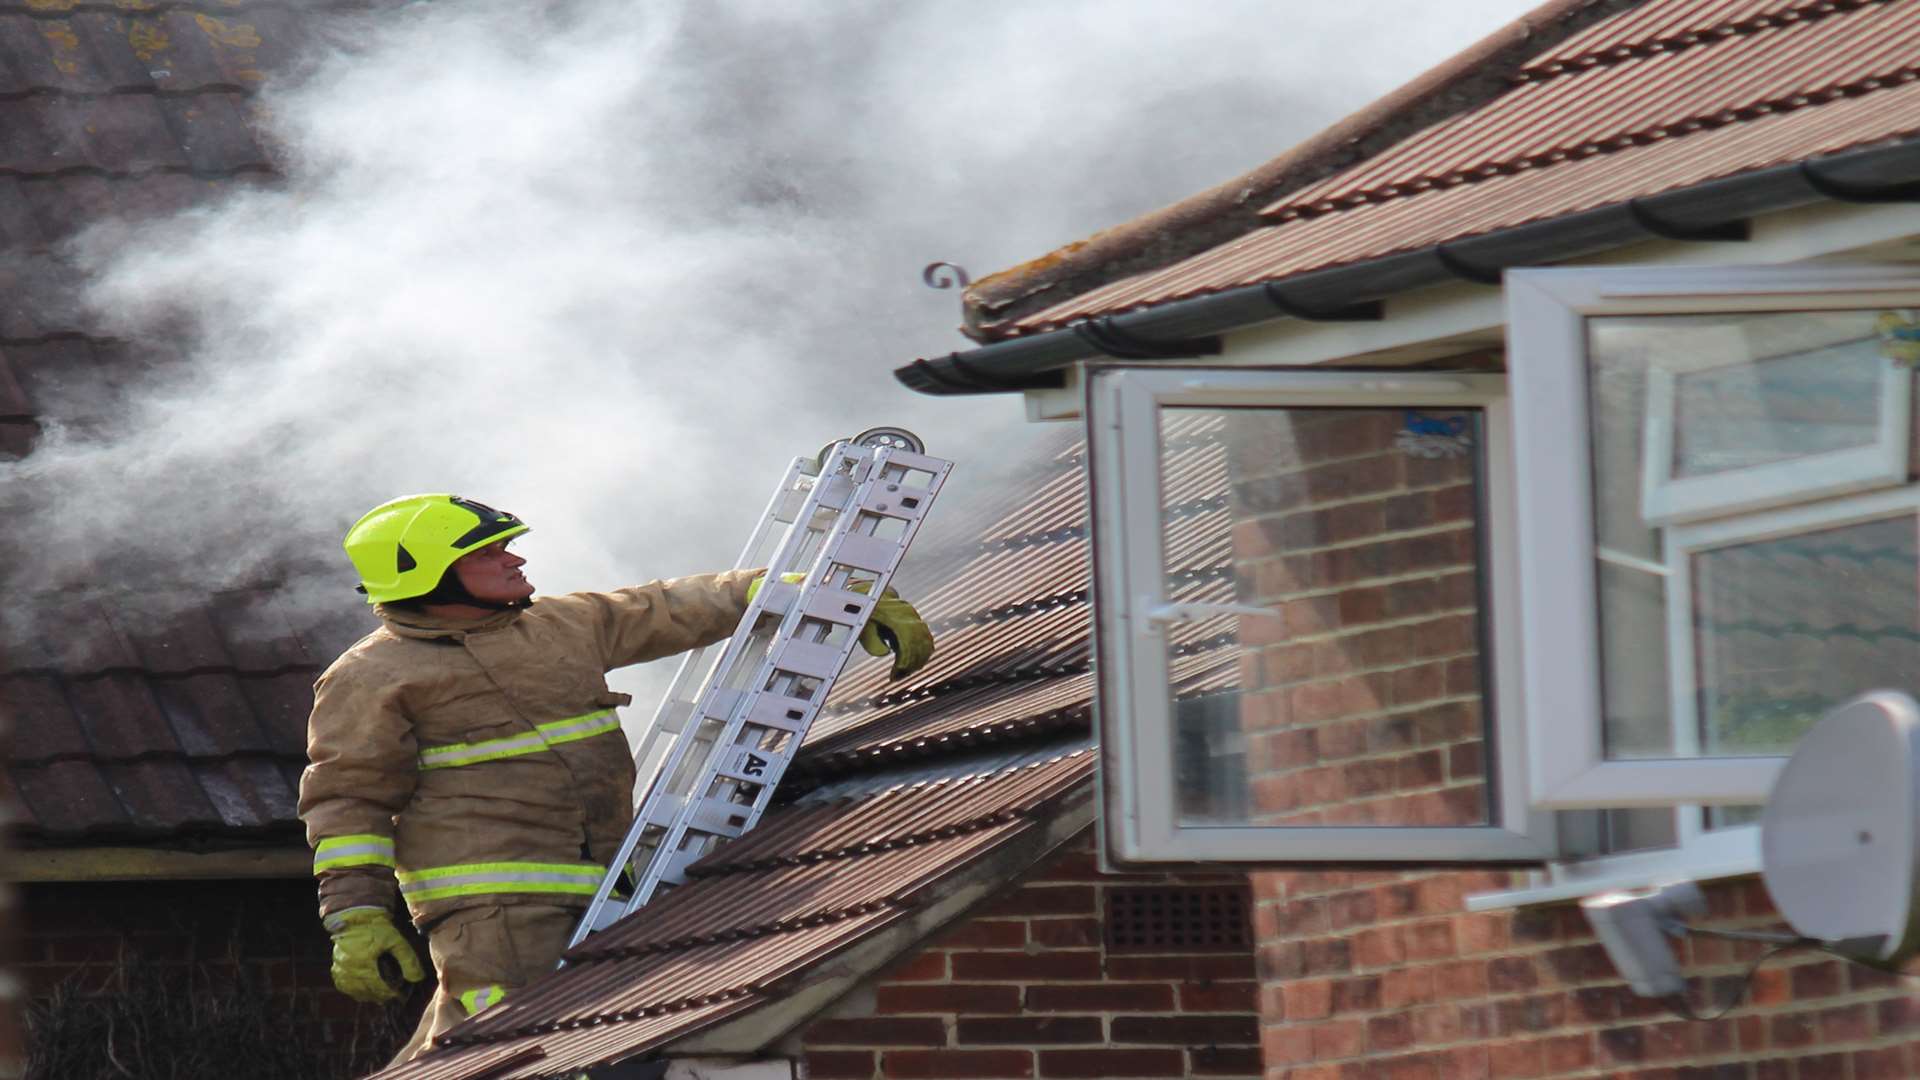 Firefighters scale a terraced house on fire in Whitfield